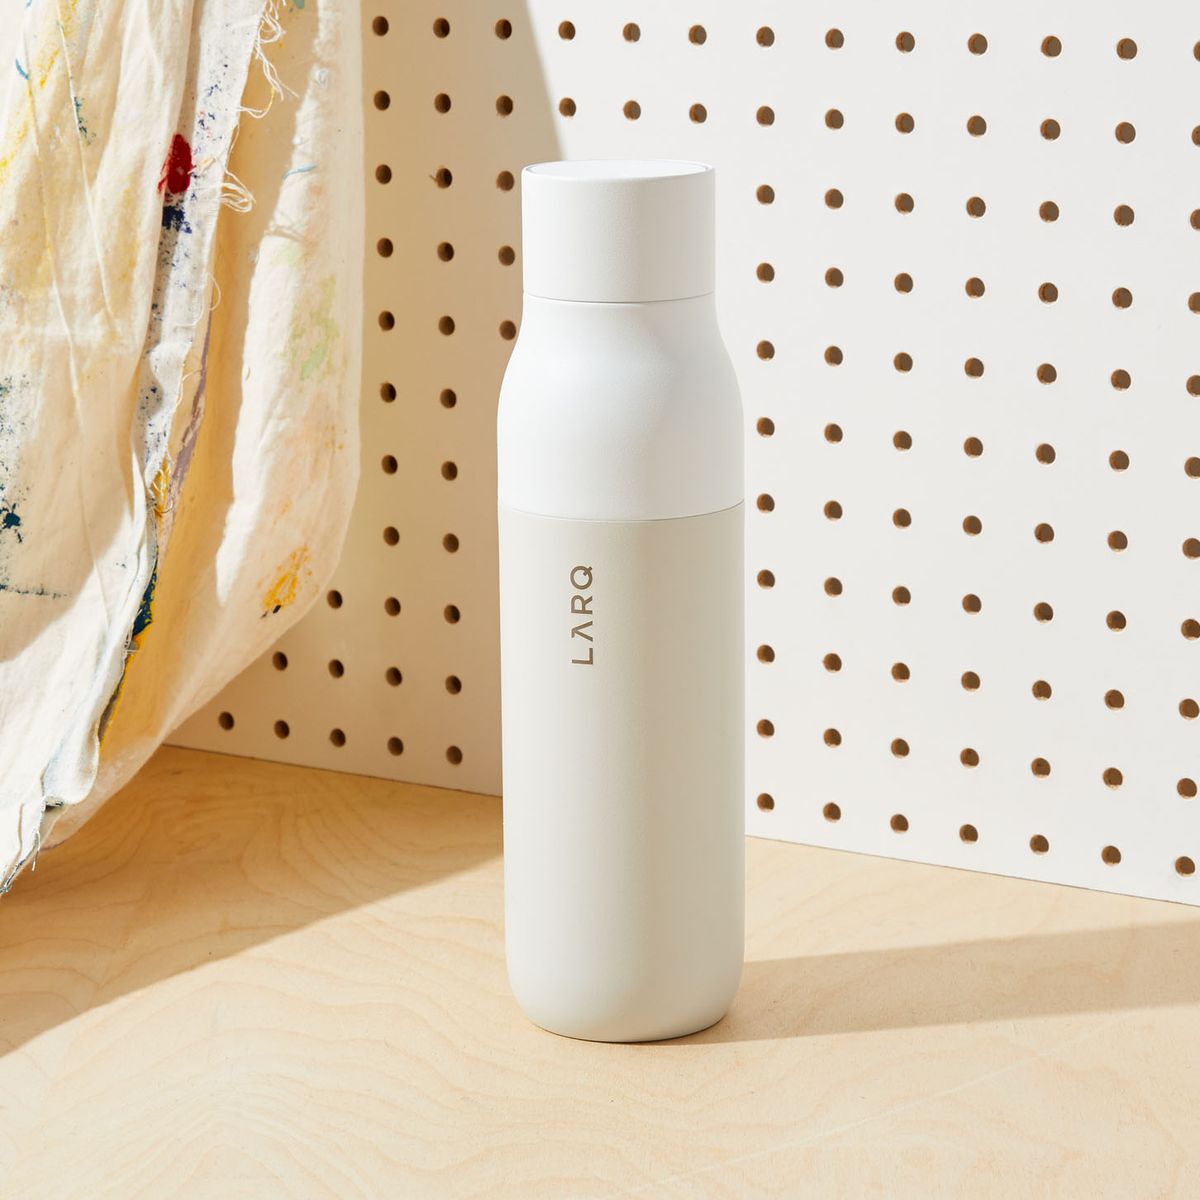 Larq Self-Cleaning UV Ray Water Bottle Review